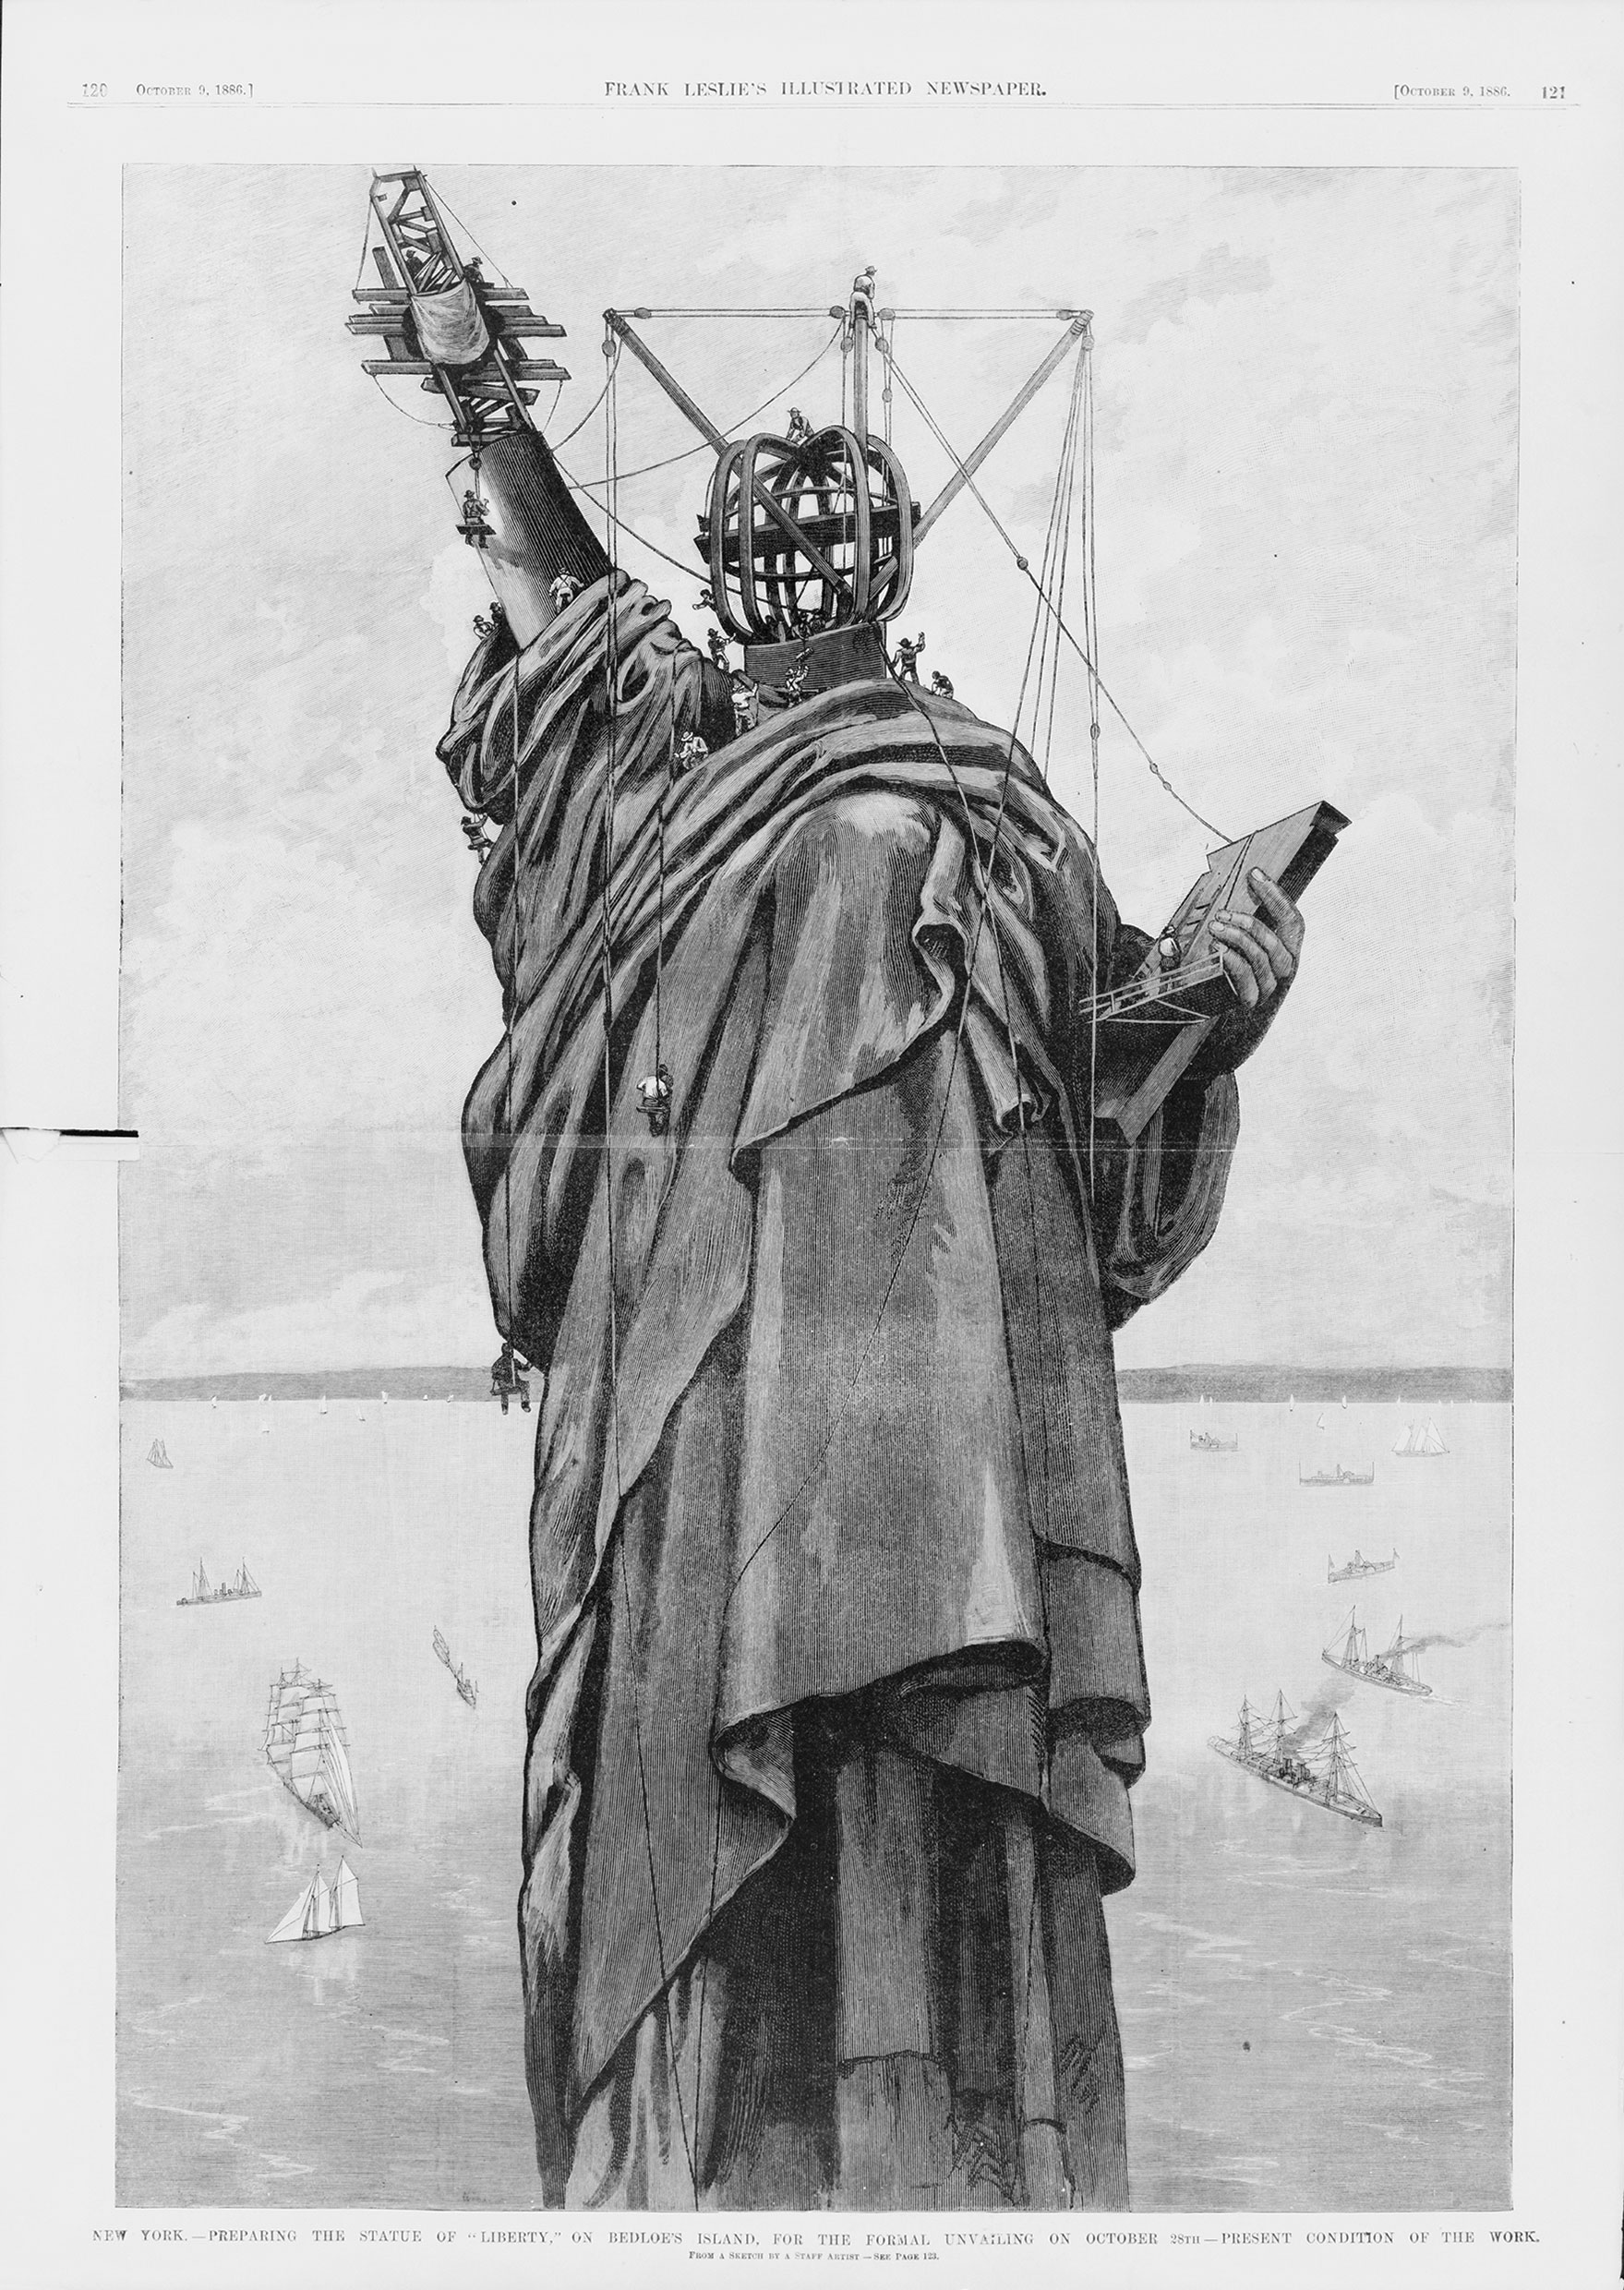 Danh Vo's “We The People” And Another Look At The Statue Of Liberty